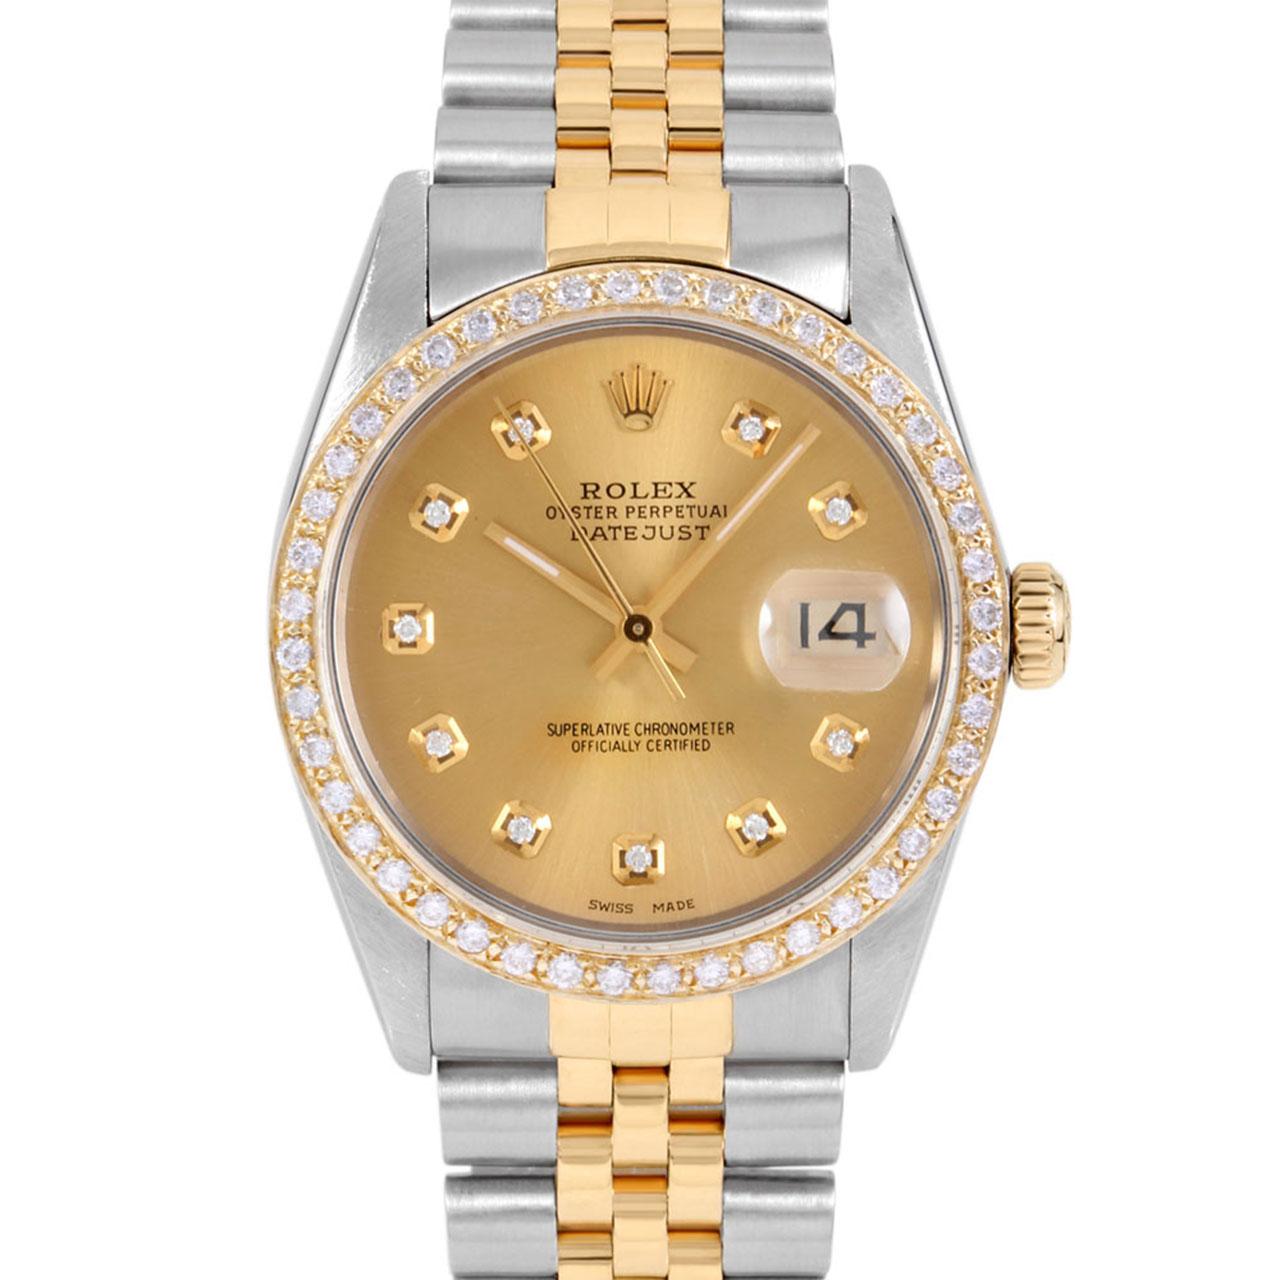 Swiss Wrist - SKU 16013-CHM-DIA-AM-BDS-JBL

Brand : Rolex
Model : Datejust Ref# 16013 - Plastic Quickset Model 
Gender : Mens
Metals : 14K Yellow Gold/ Stainless Steel
Case Size : 36 mm
Dial : Custom Champagne Diamond Dial (This dial is not original